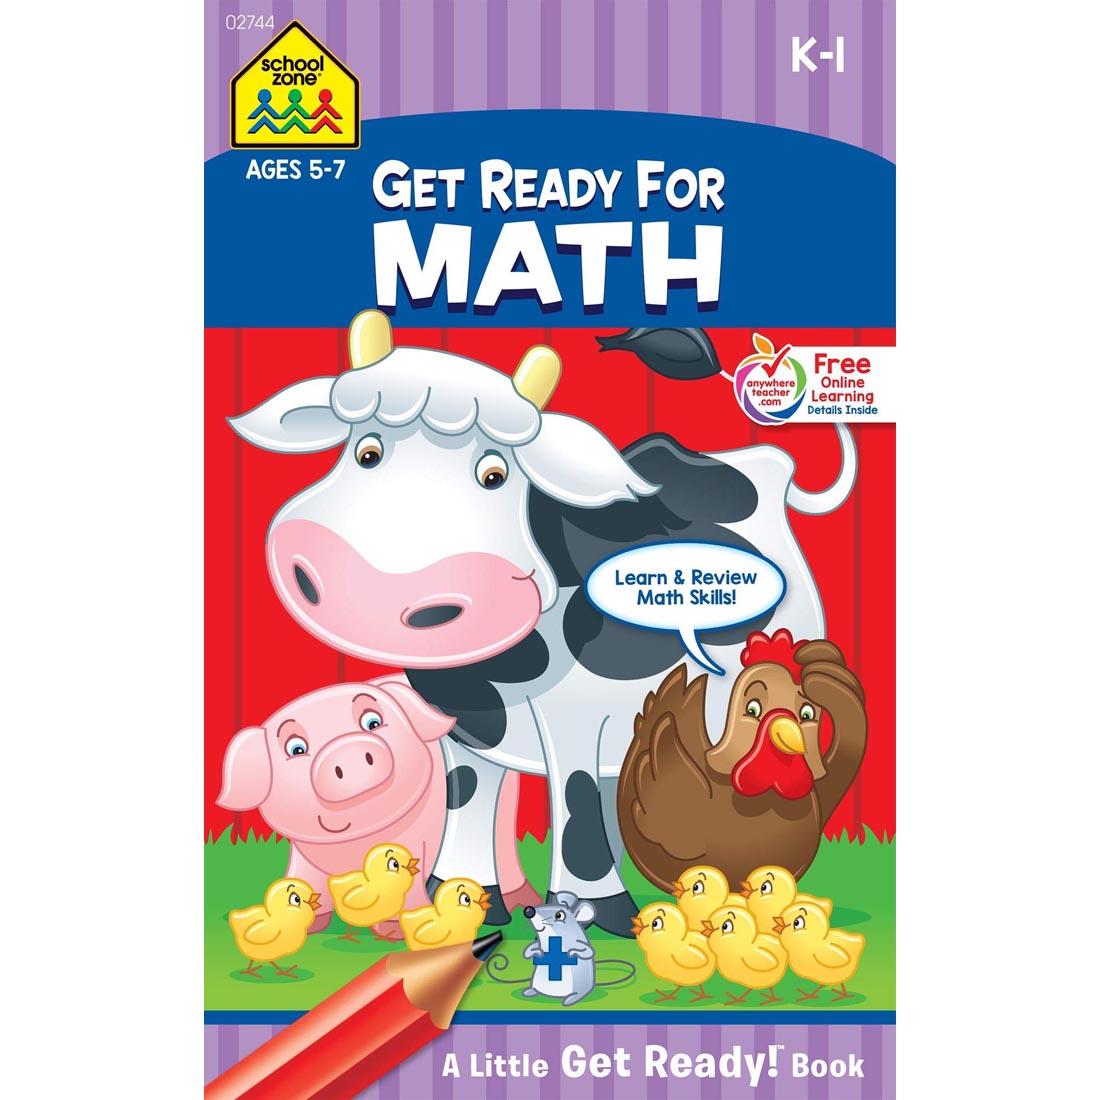 Cover of School Zone Get Ready For Math Little Get Ready! Book